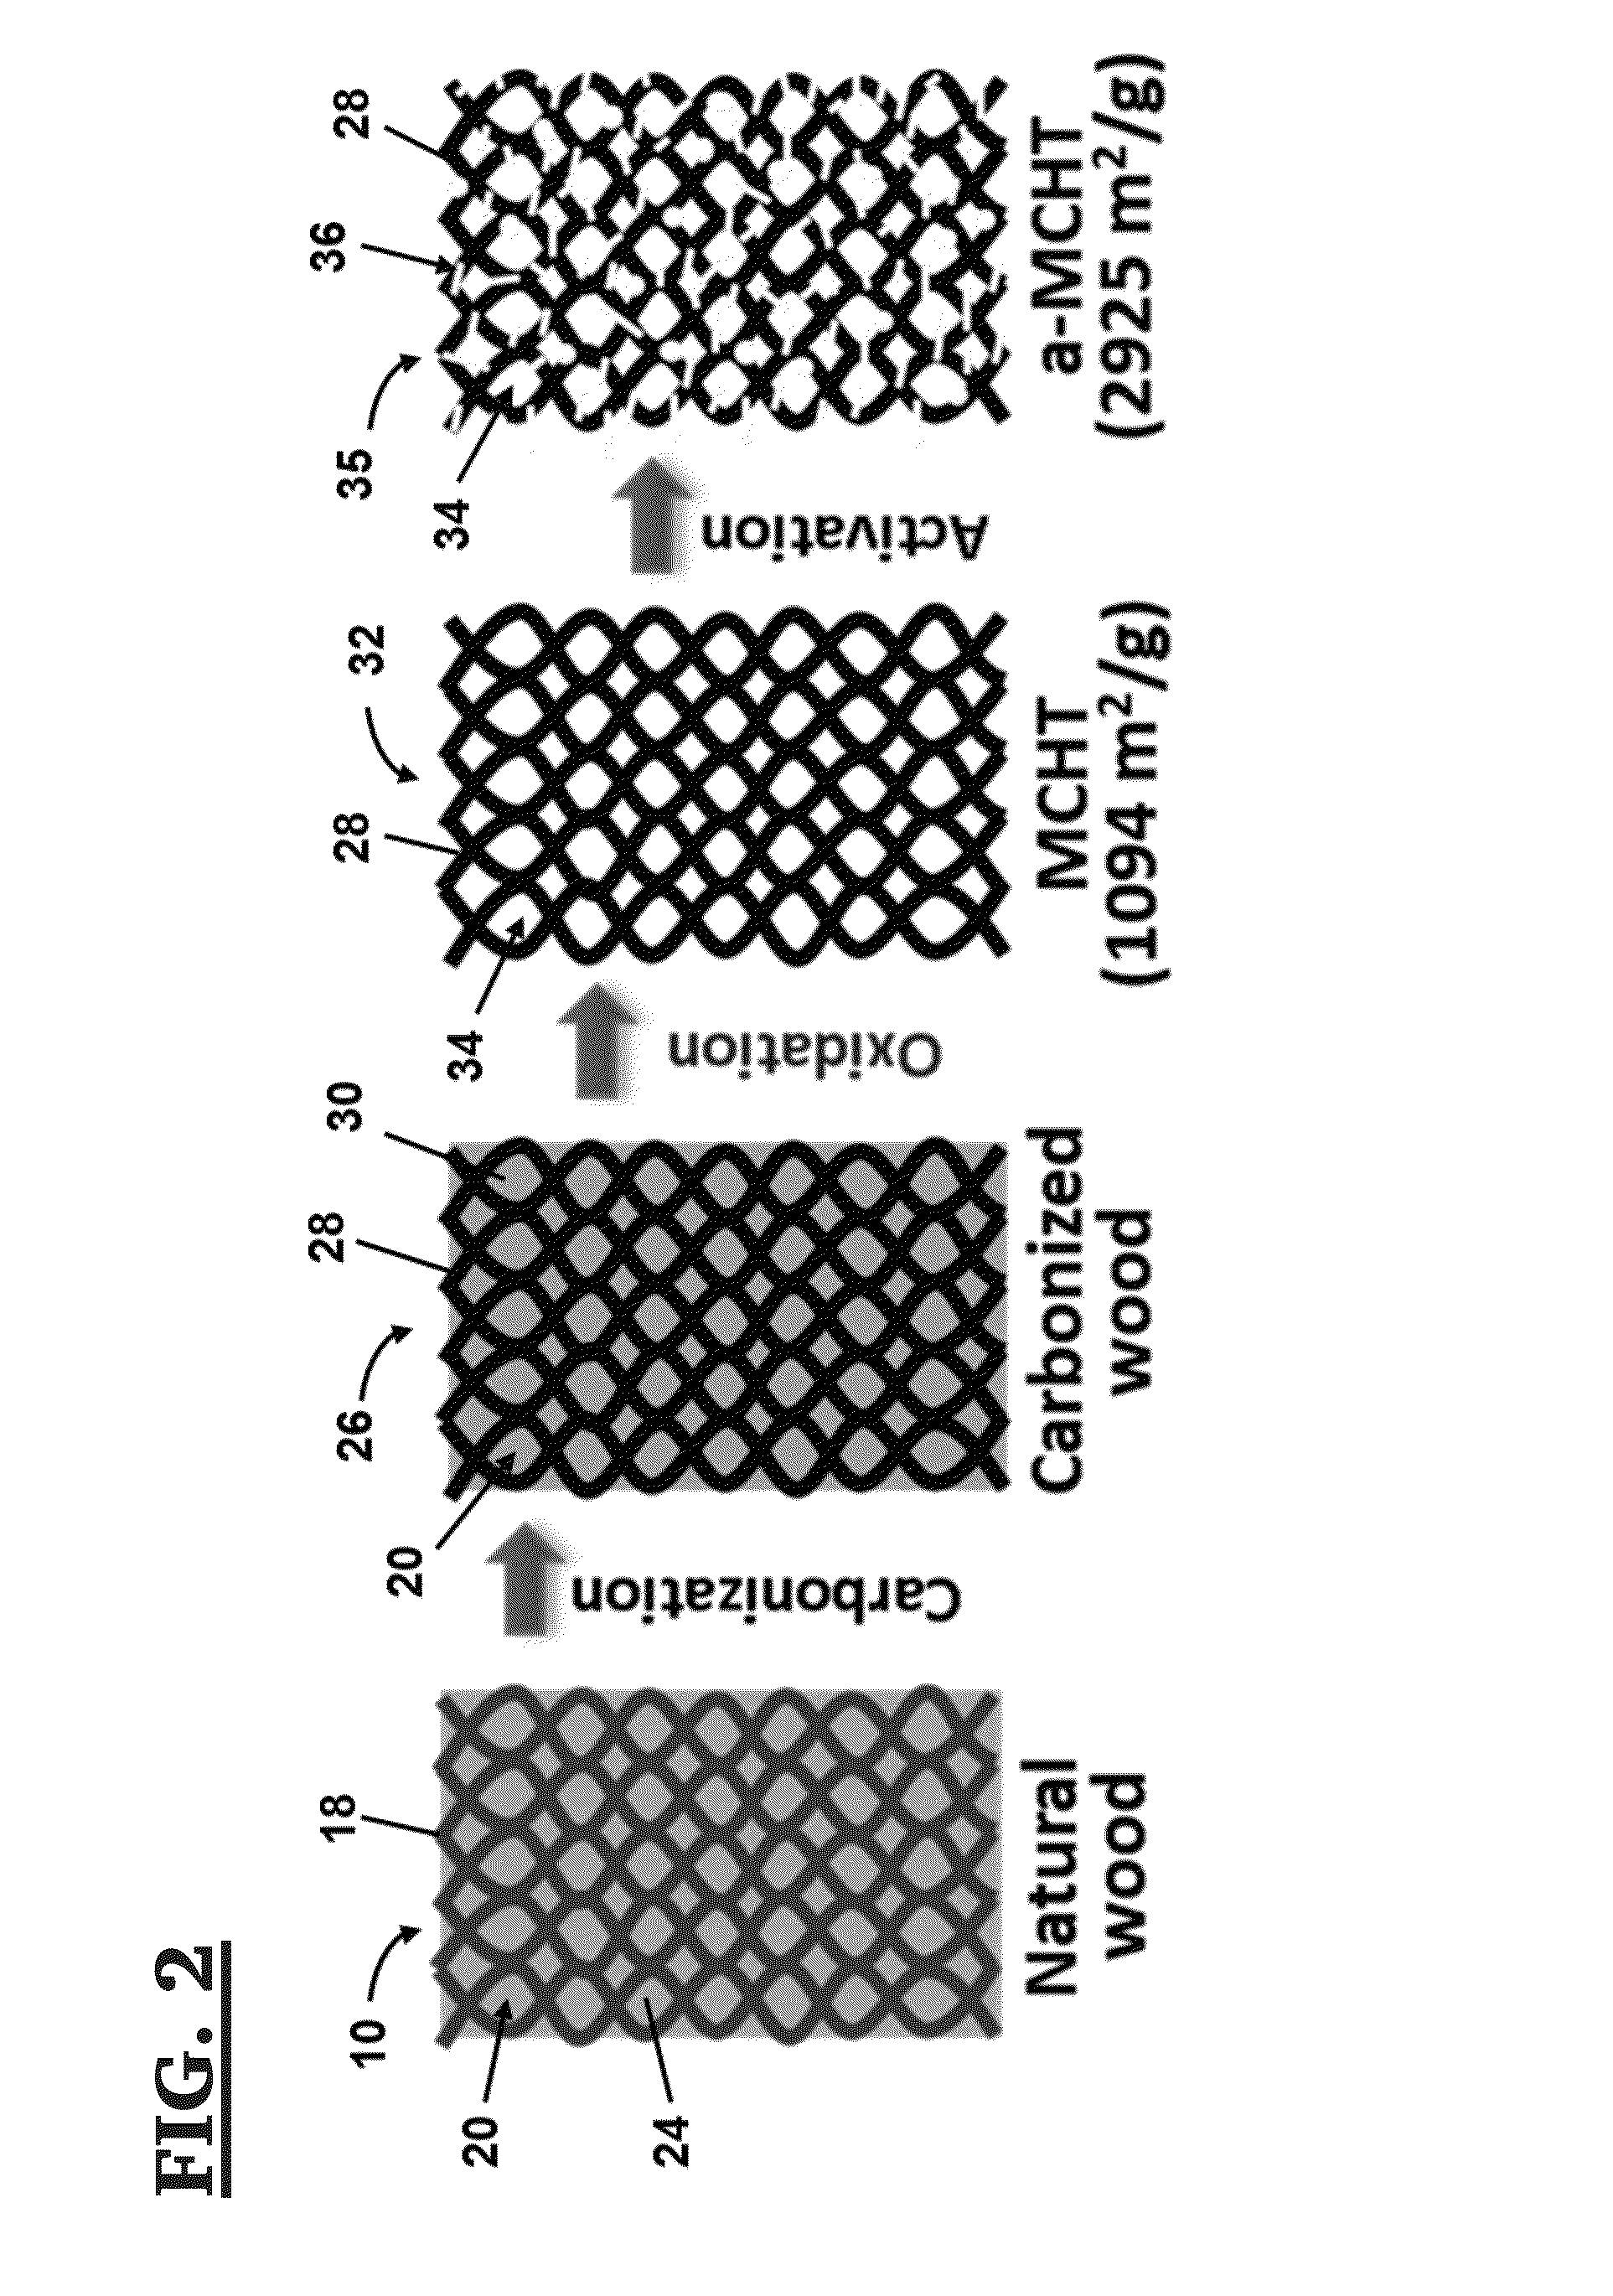 Method of making mesoporous carbon from natural wood and mesoporous carbon hollow tubes made thereby